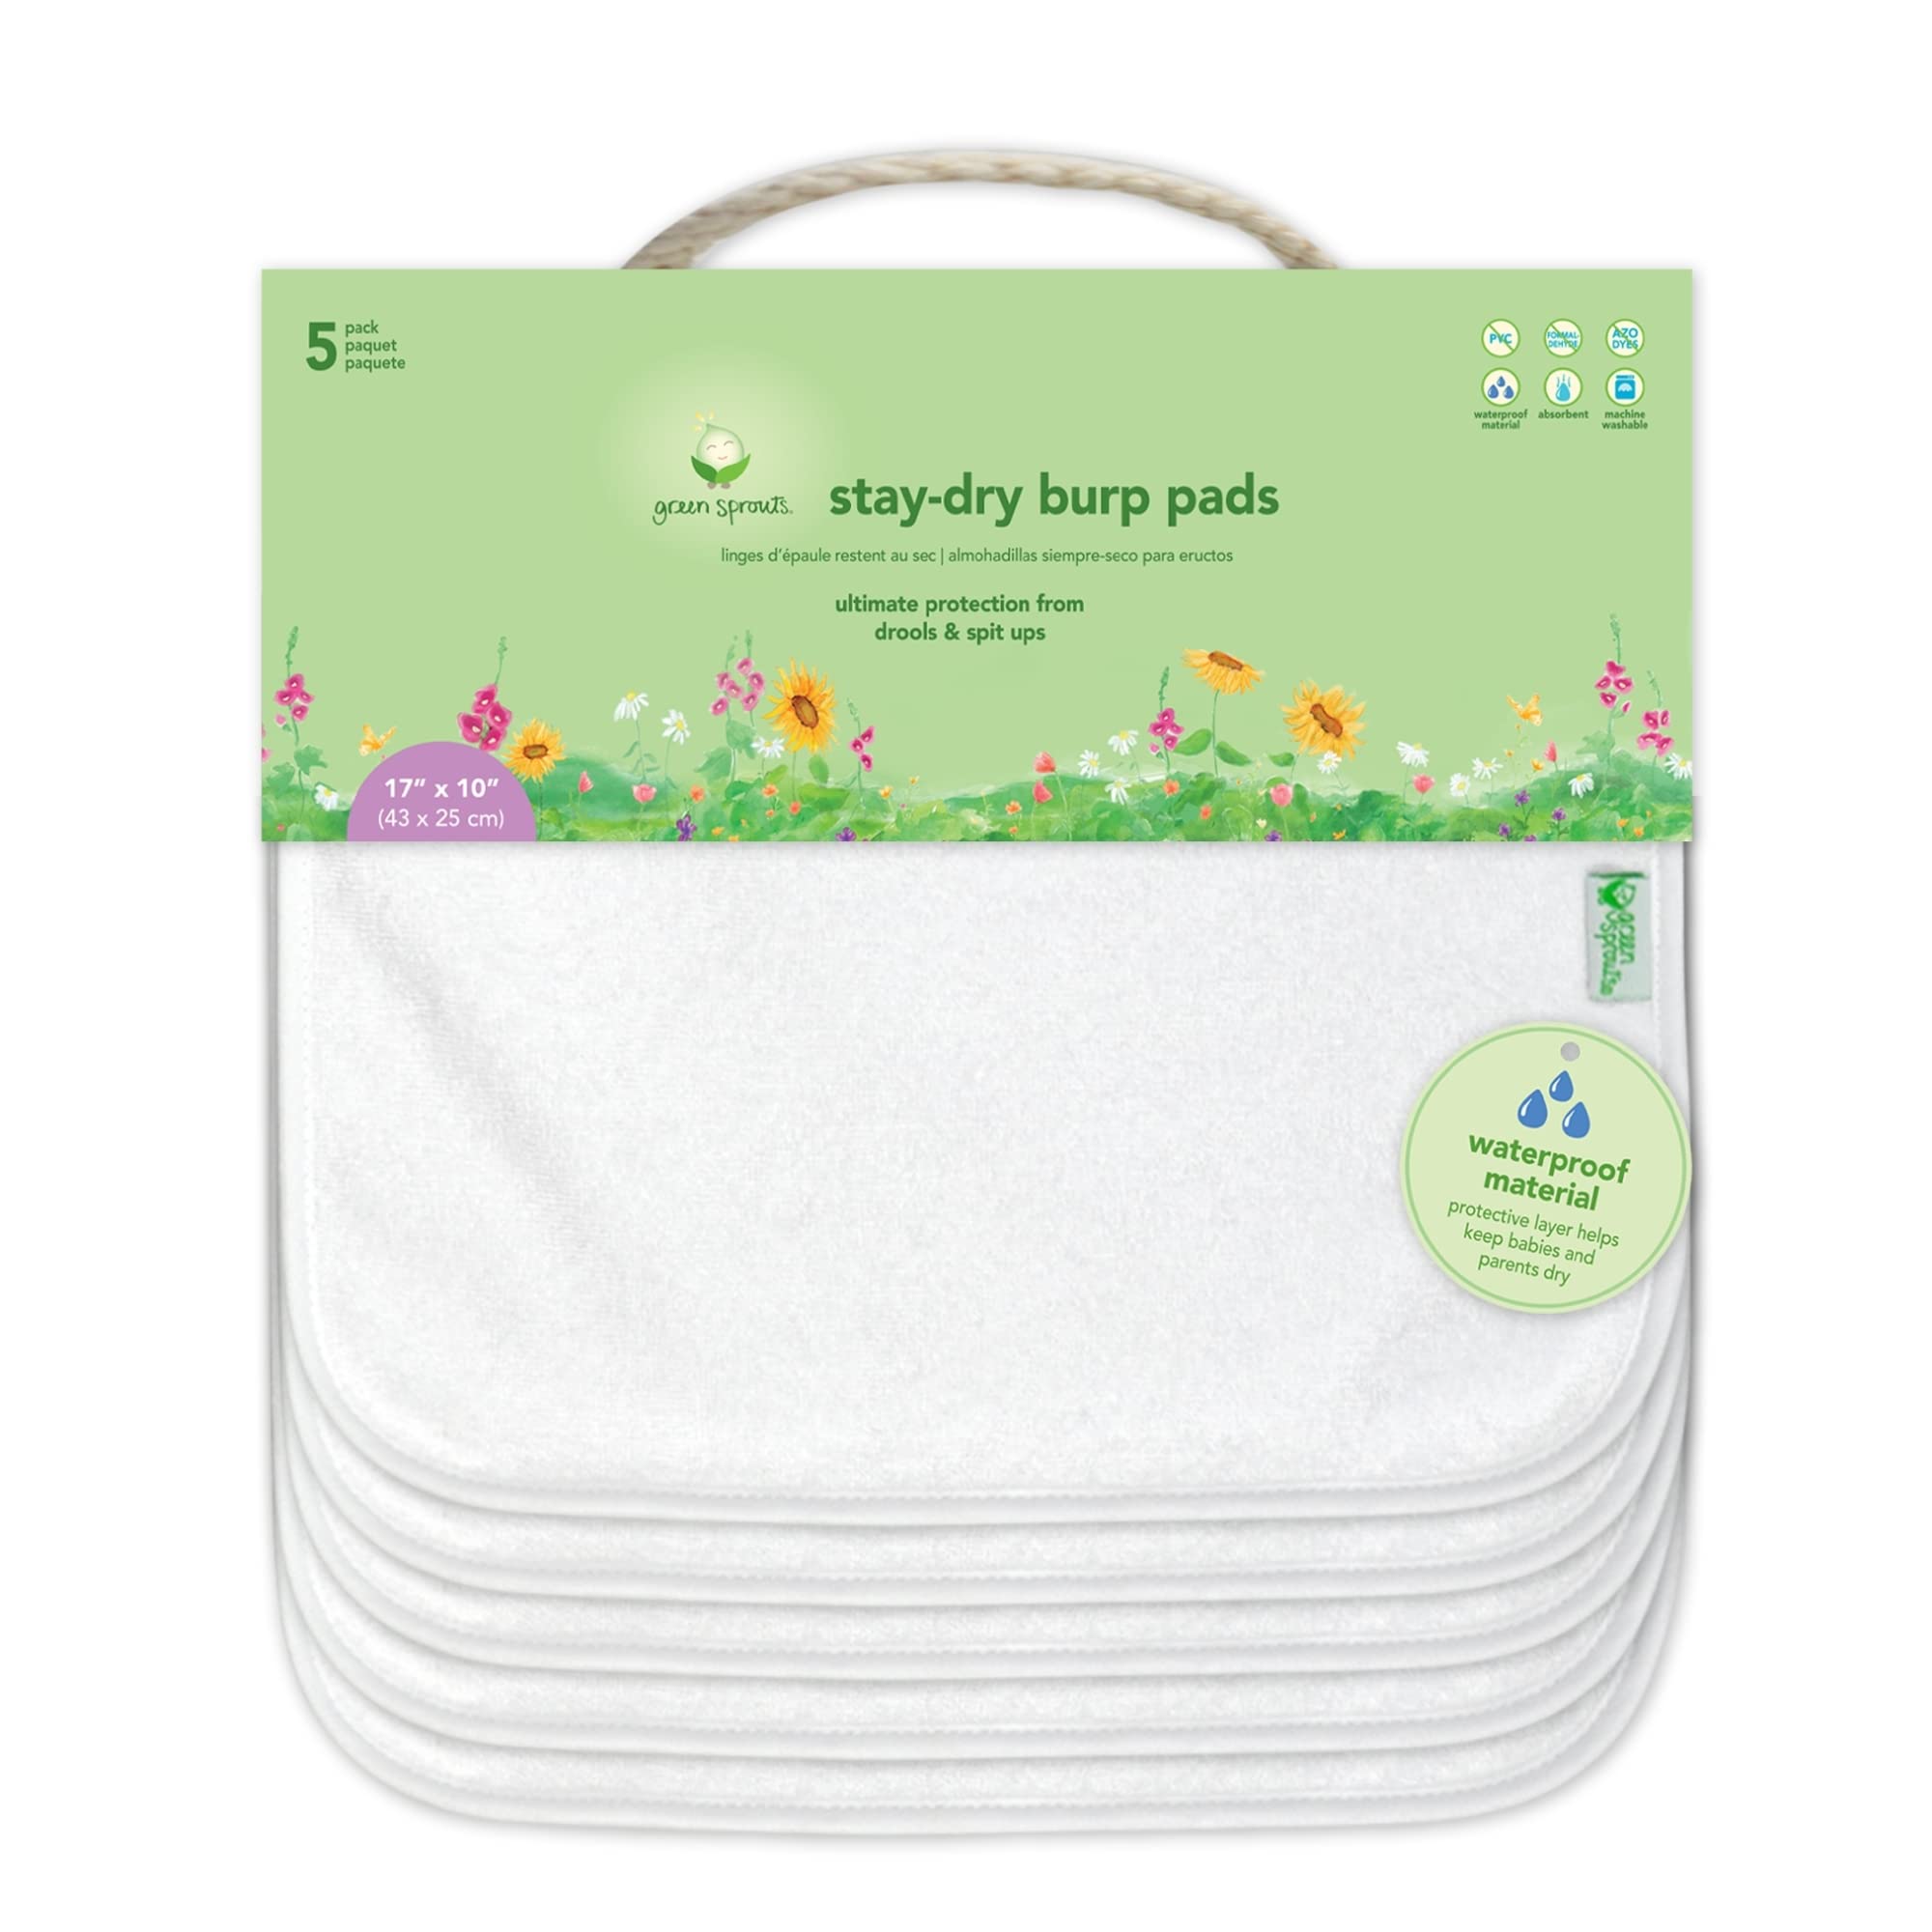 green sprouts Stay-Dry Burp Pads (5 Count) | Ultimate protection from drools & spit ups | Waterproof protection, Soft & absorbent terry, Machine washable , White 17"x10"(Pack of 1)